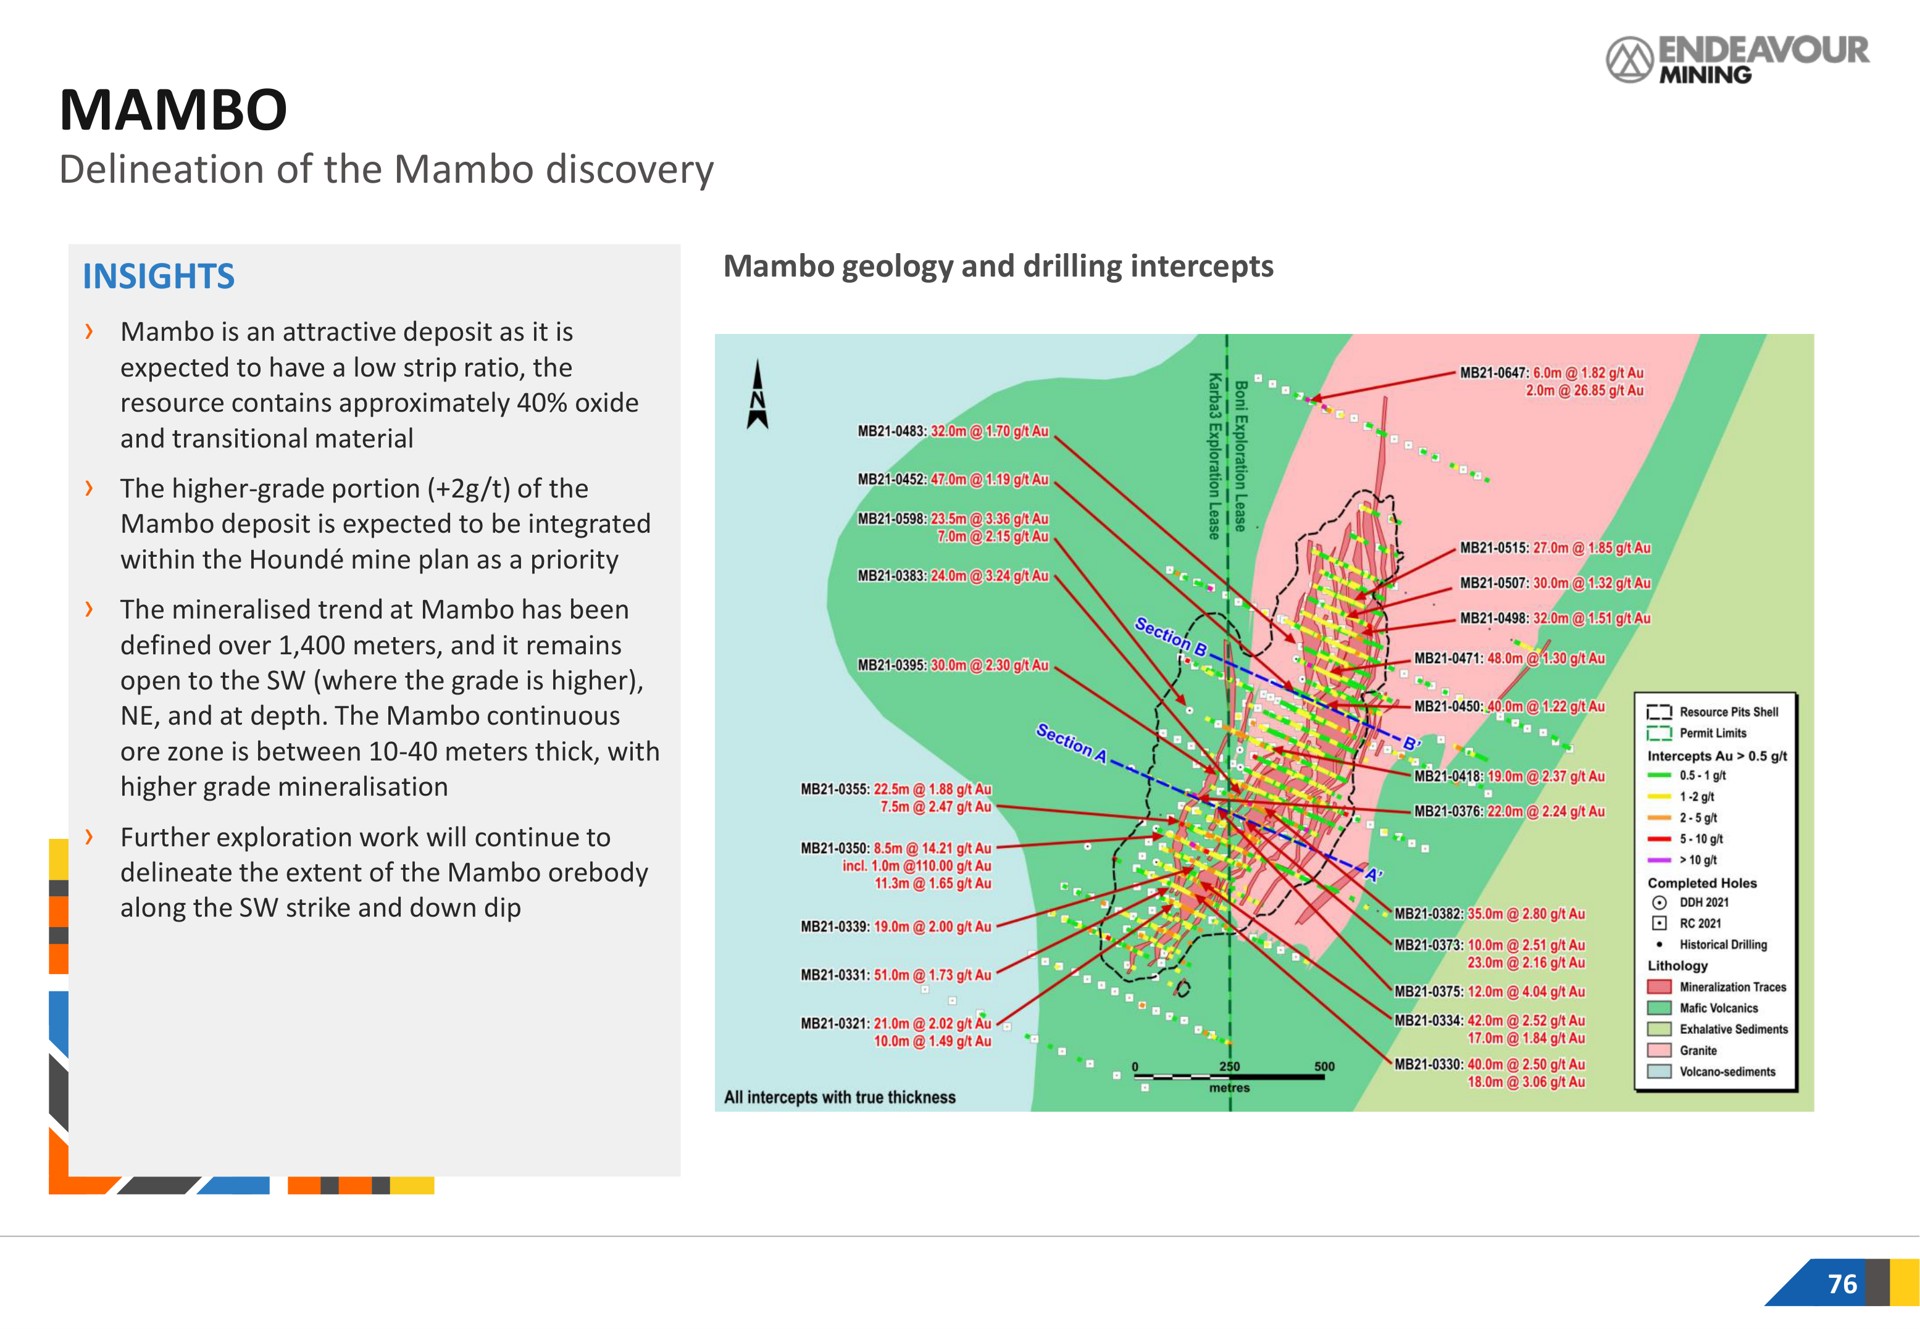 mambo delineation of the mambo discovery | Endeavour Mining